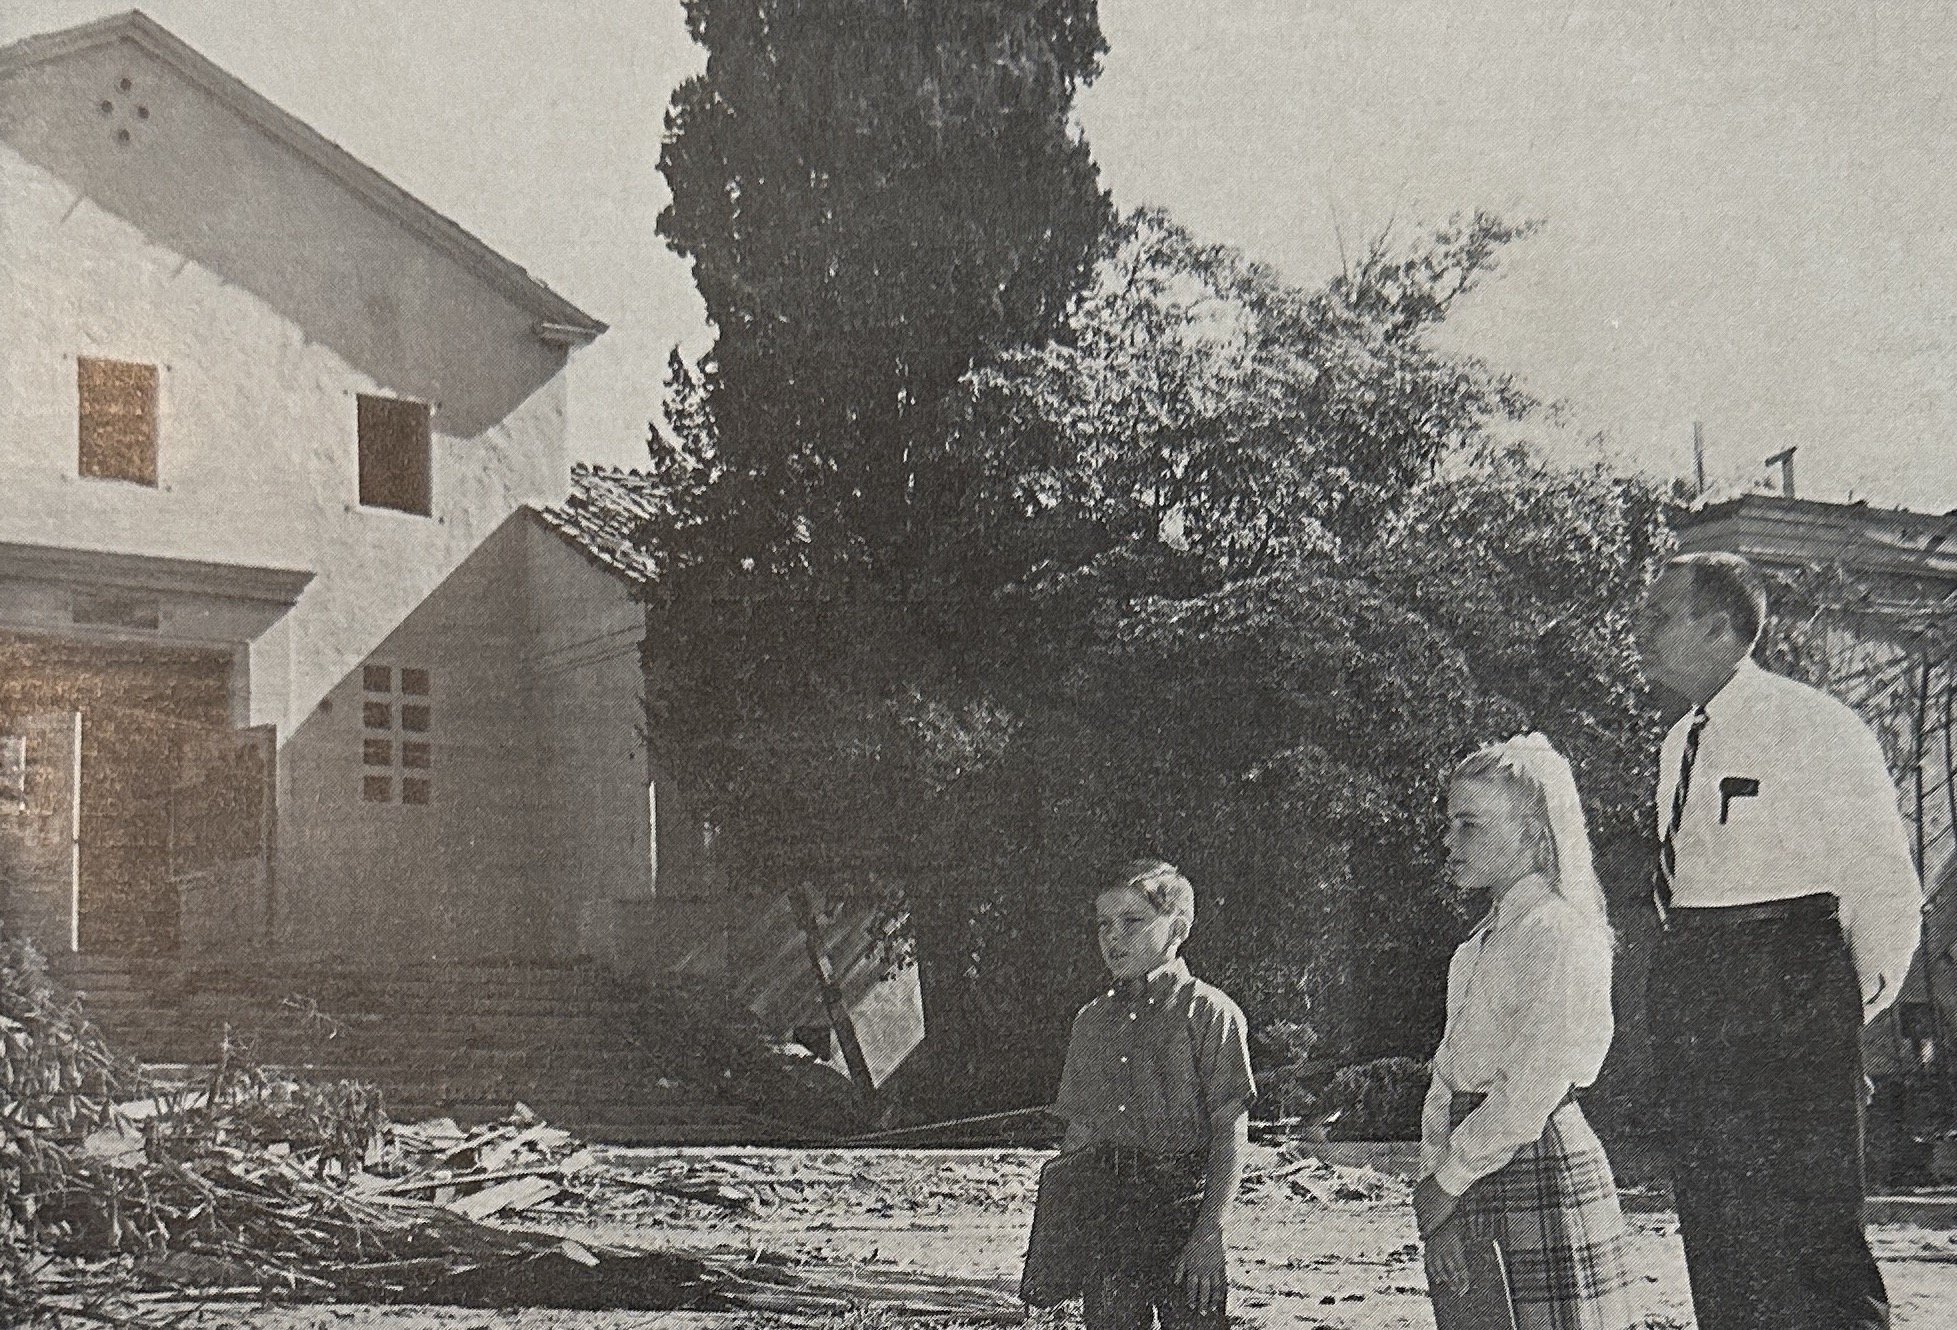  The La Cañada School about to be demolished to make way for the freeway detour. Cover image from the August 15, 1968 issue of the  La Cañada Valley Sun.  